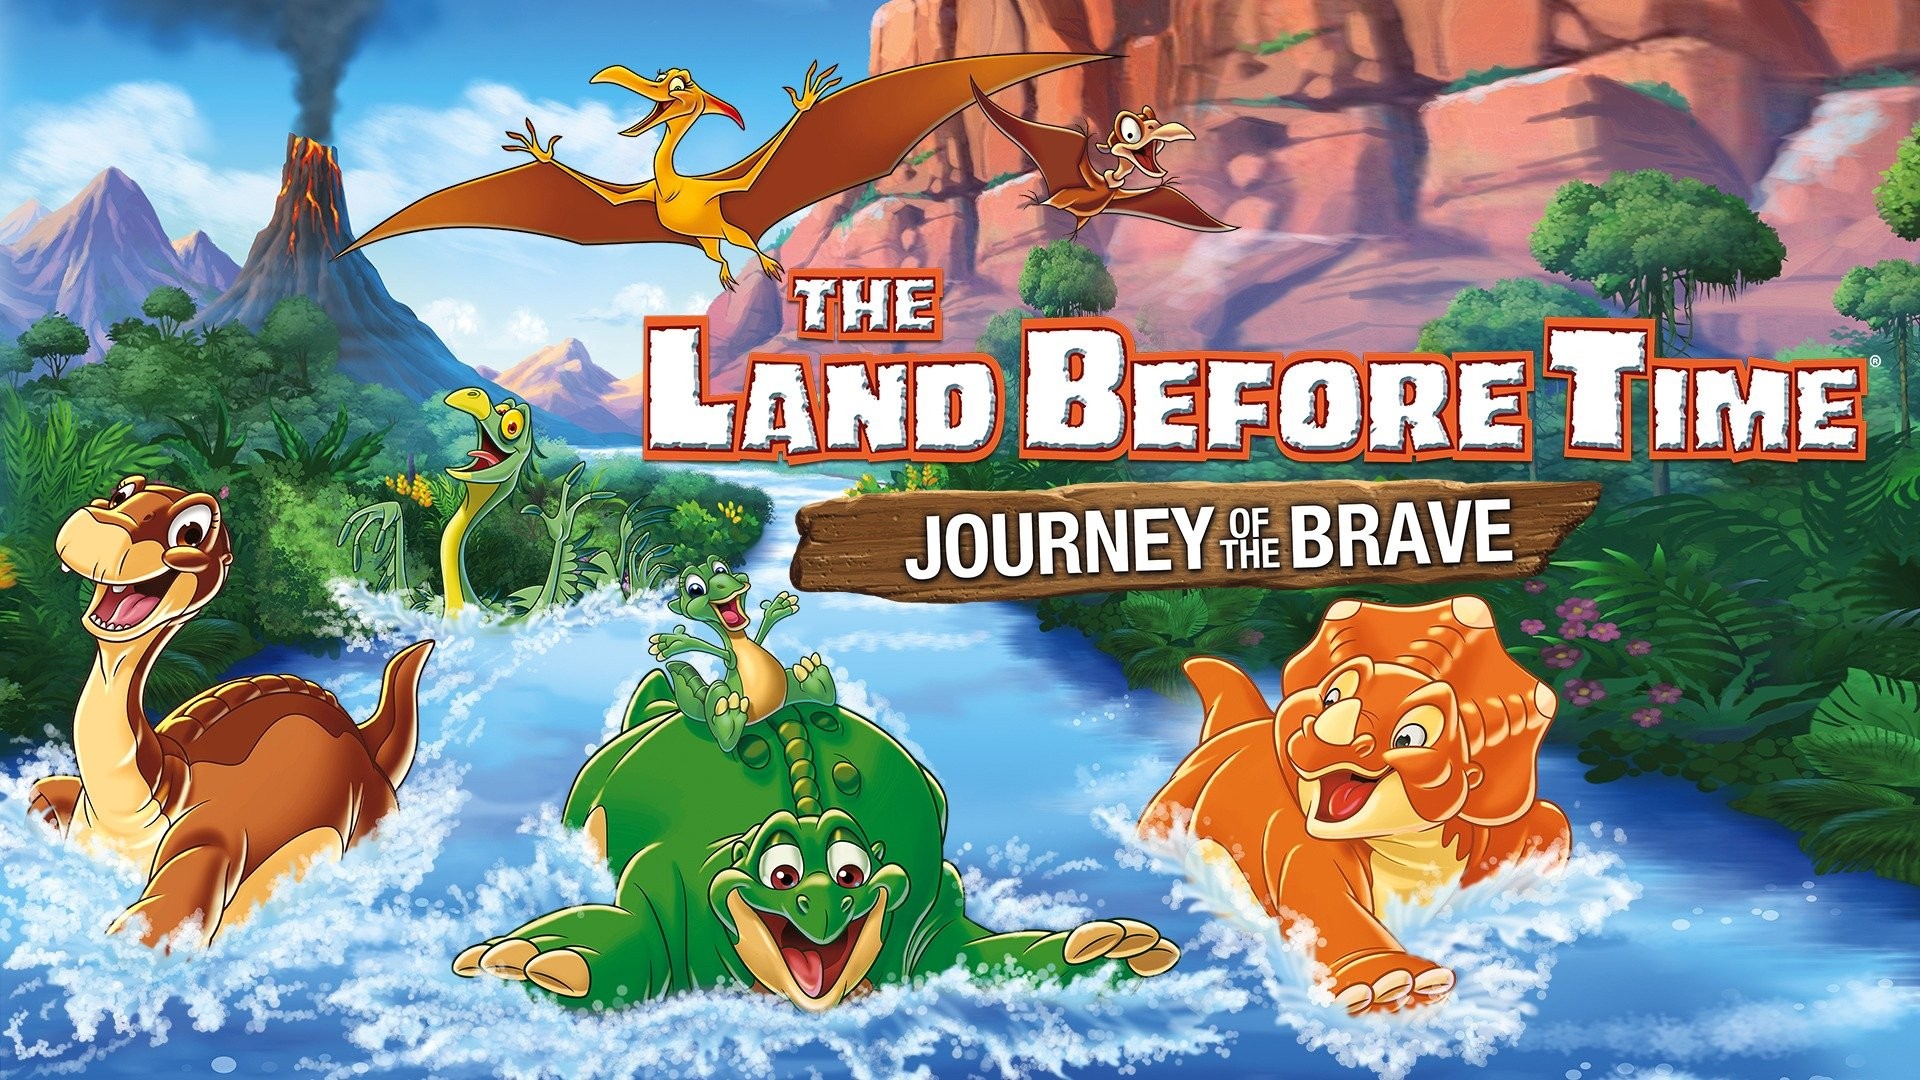 The Land Before Time XIV: Journey of the Brave | Rotten Tomatoes